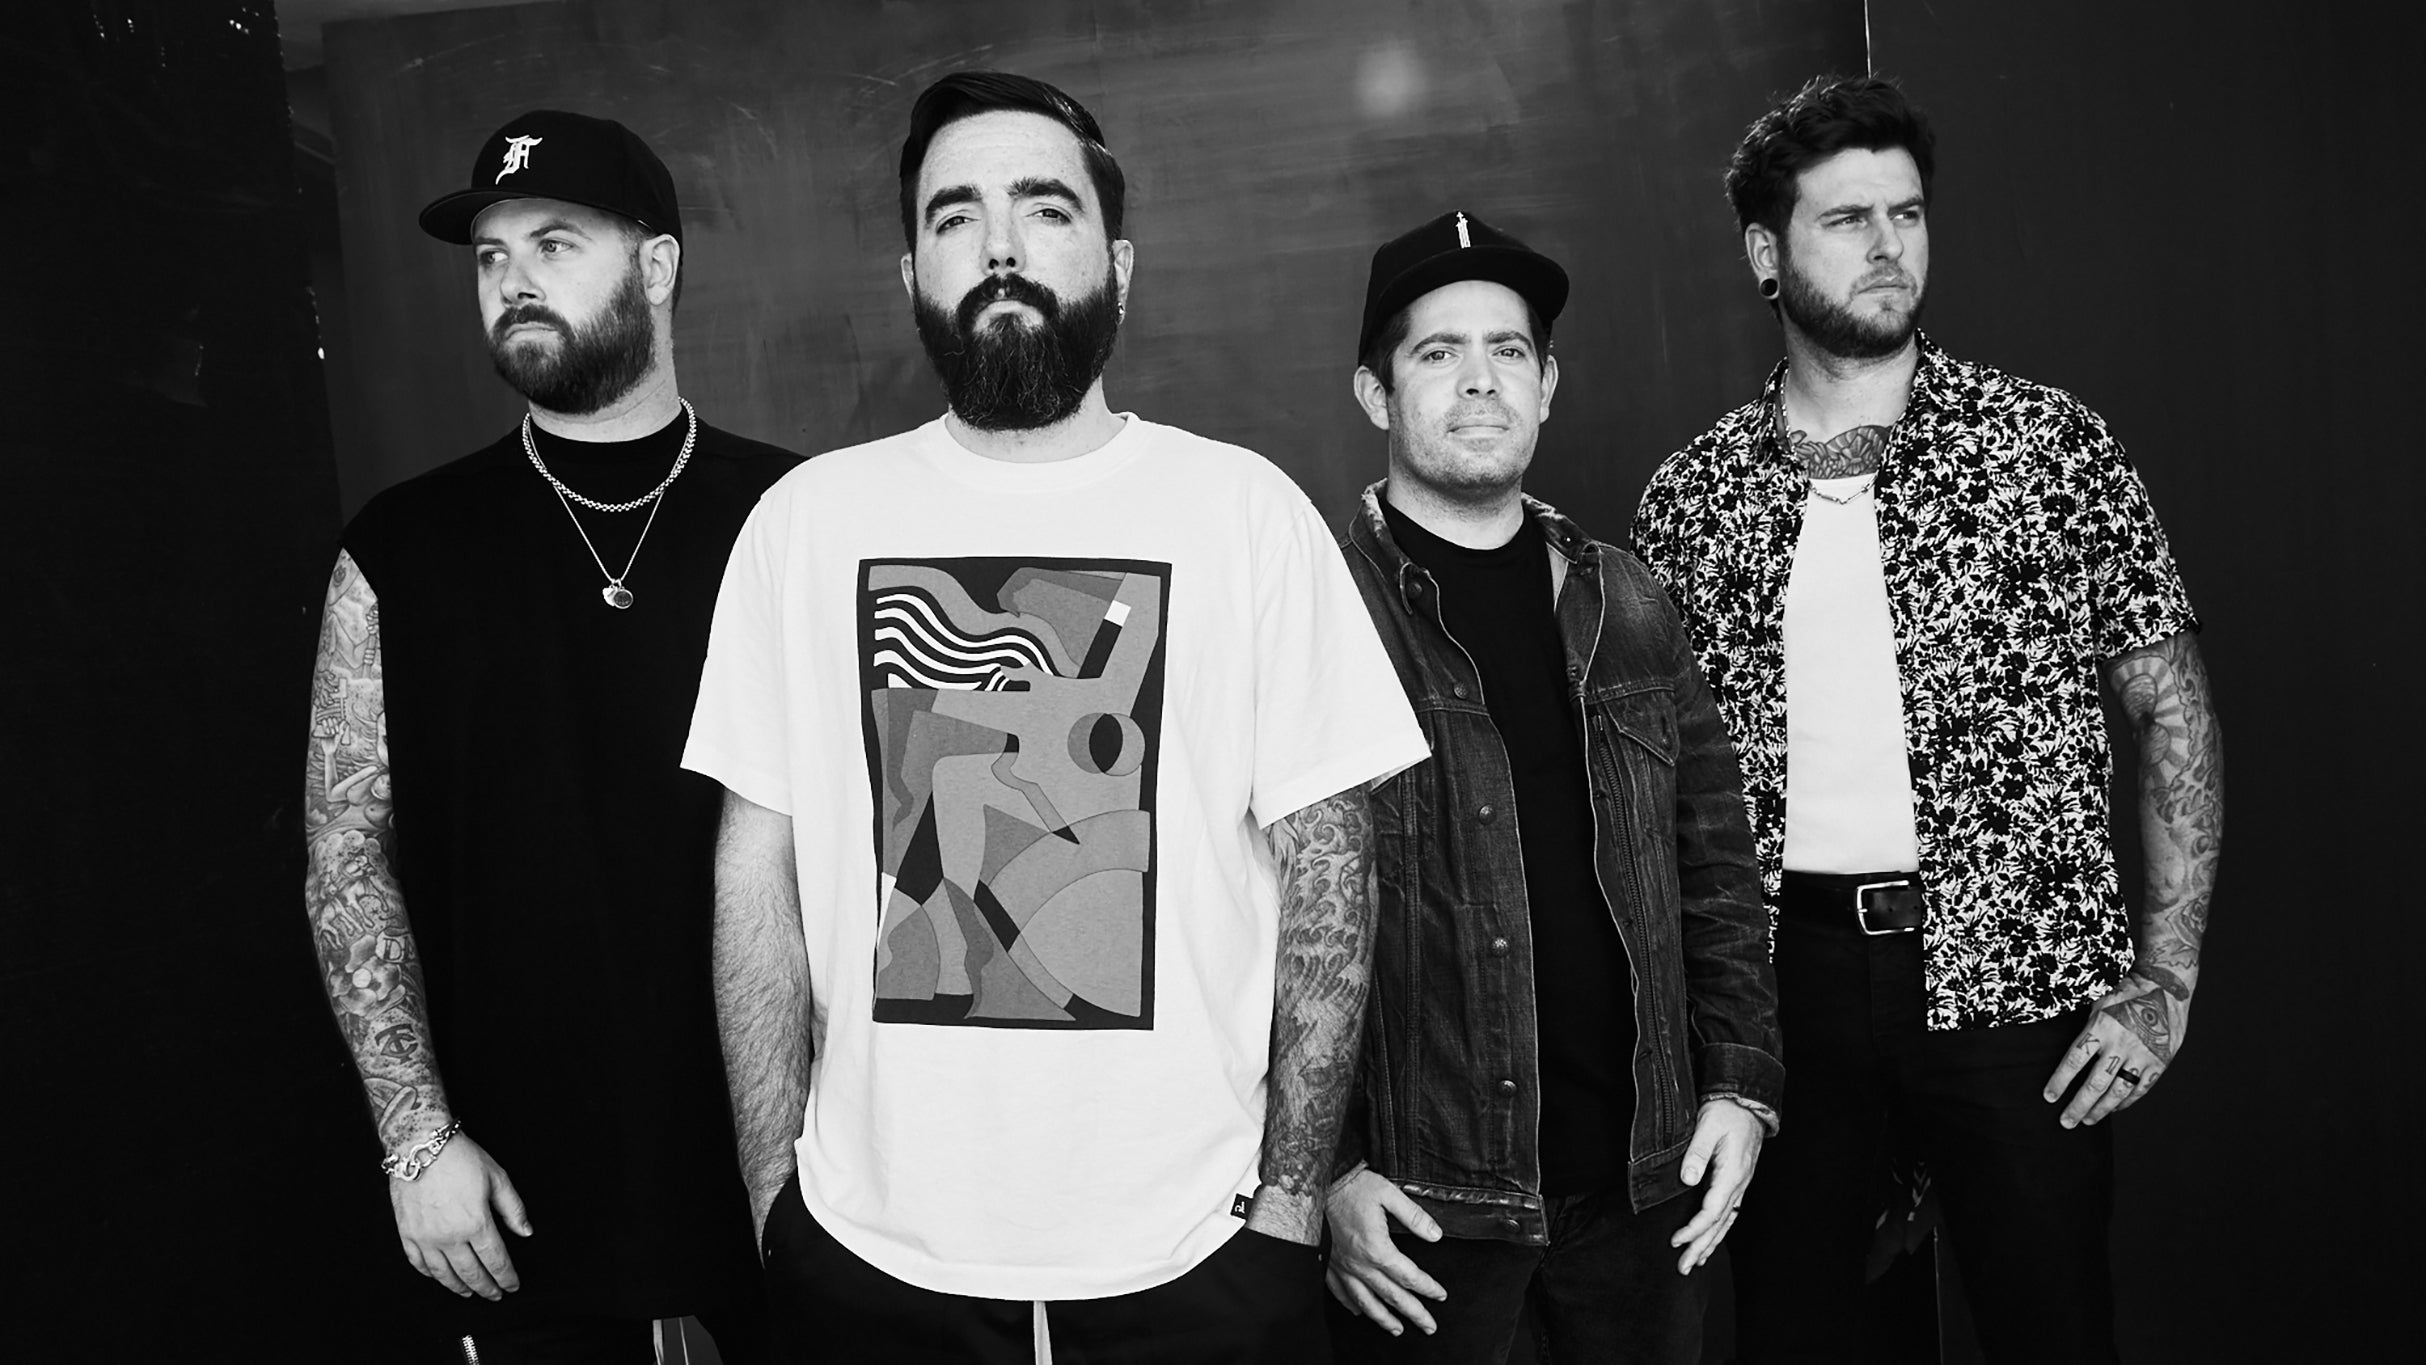 A Day To Remember - The Least Anticipated Album Tour presale code for real tickets in Oakland